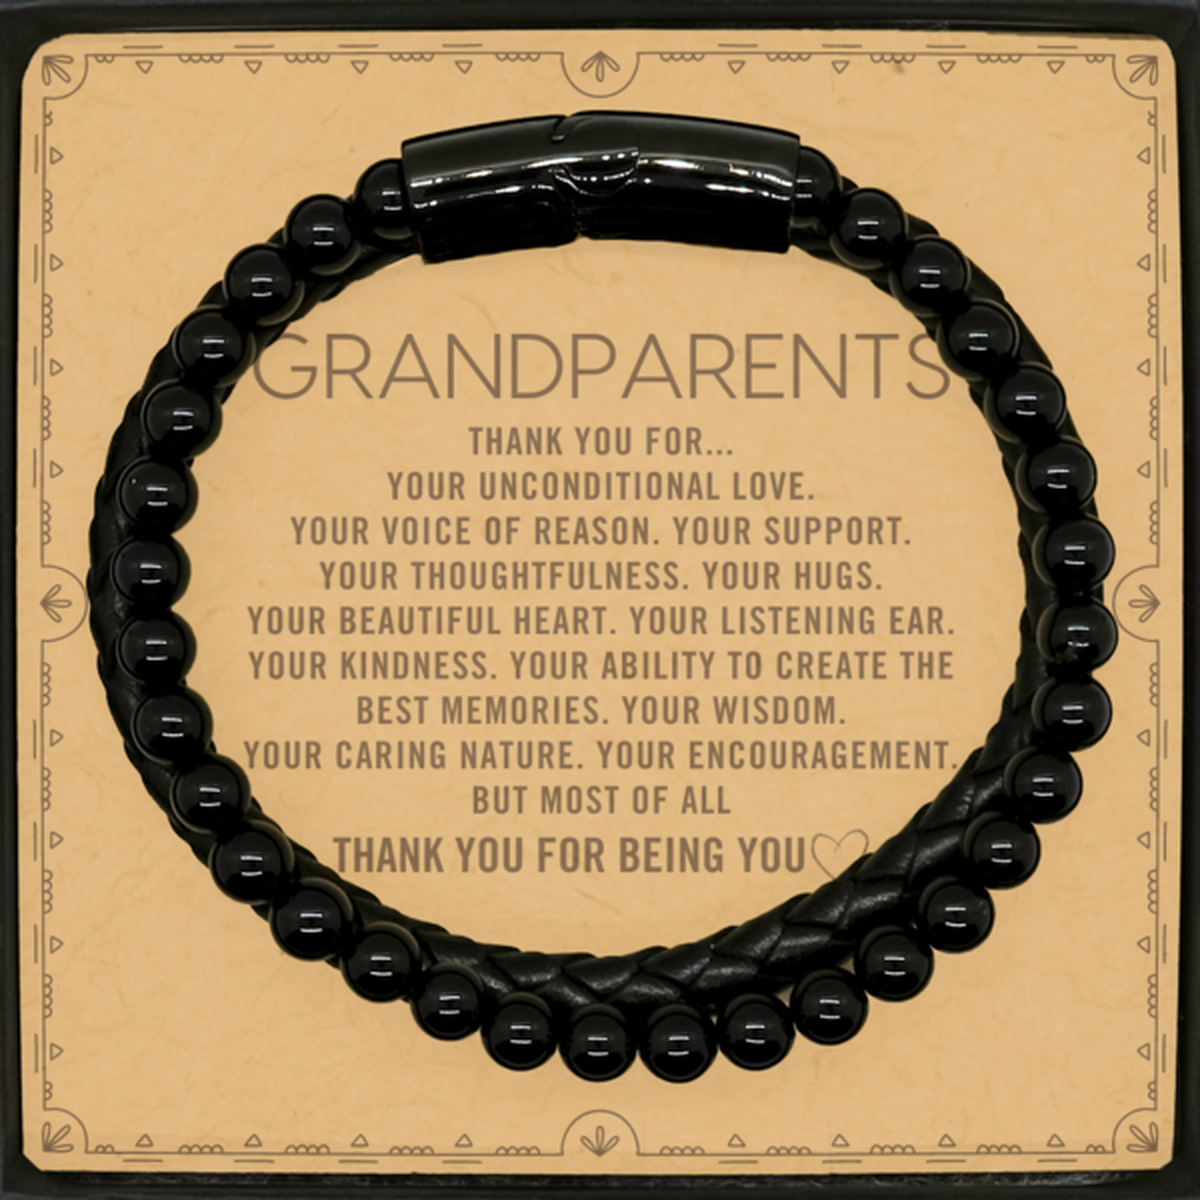 Grandparents Stone Leather Bracelets Custom, Message Card Gifts For Grandparents Christmas Graduation Birthday Gifts for Men Women Grandparents Thank you for Your unconditional love